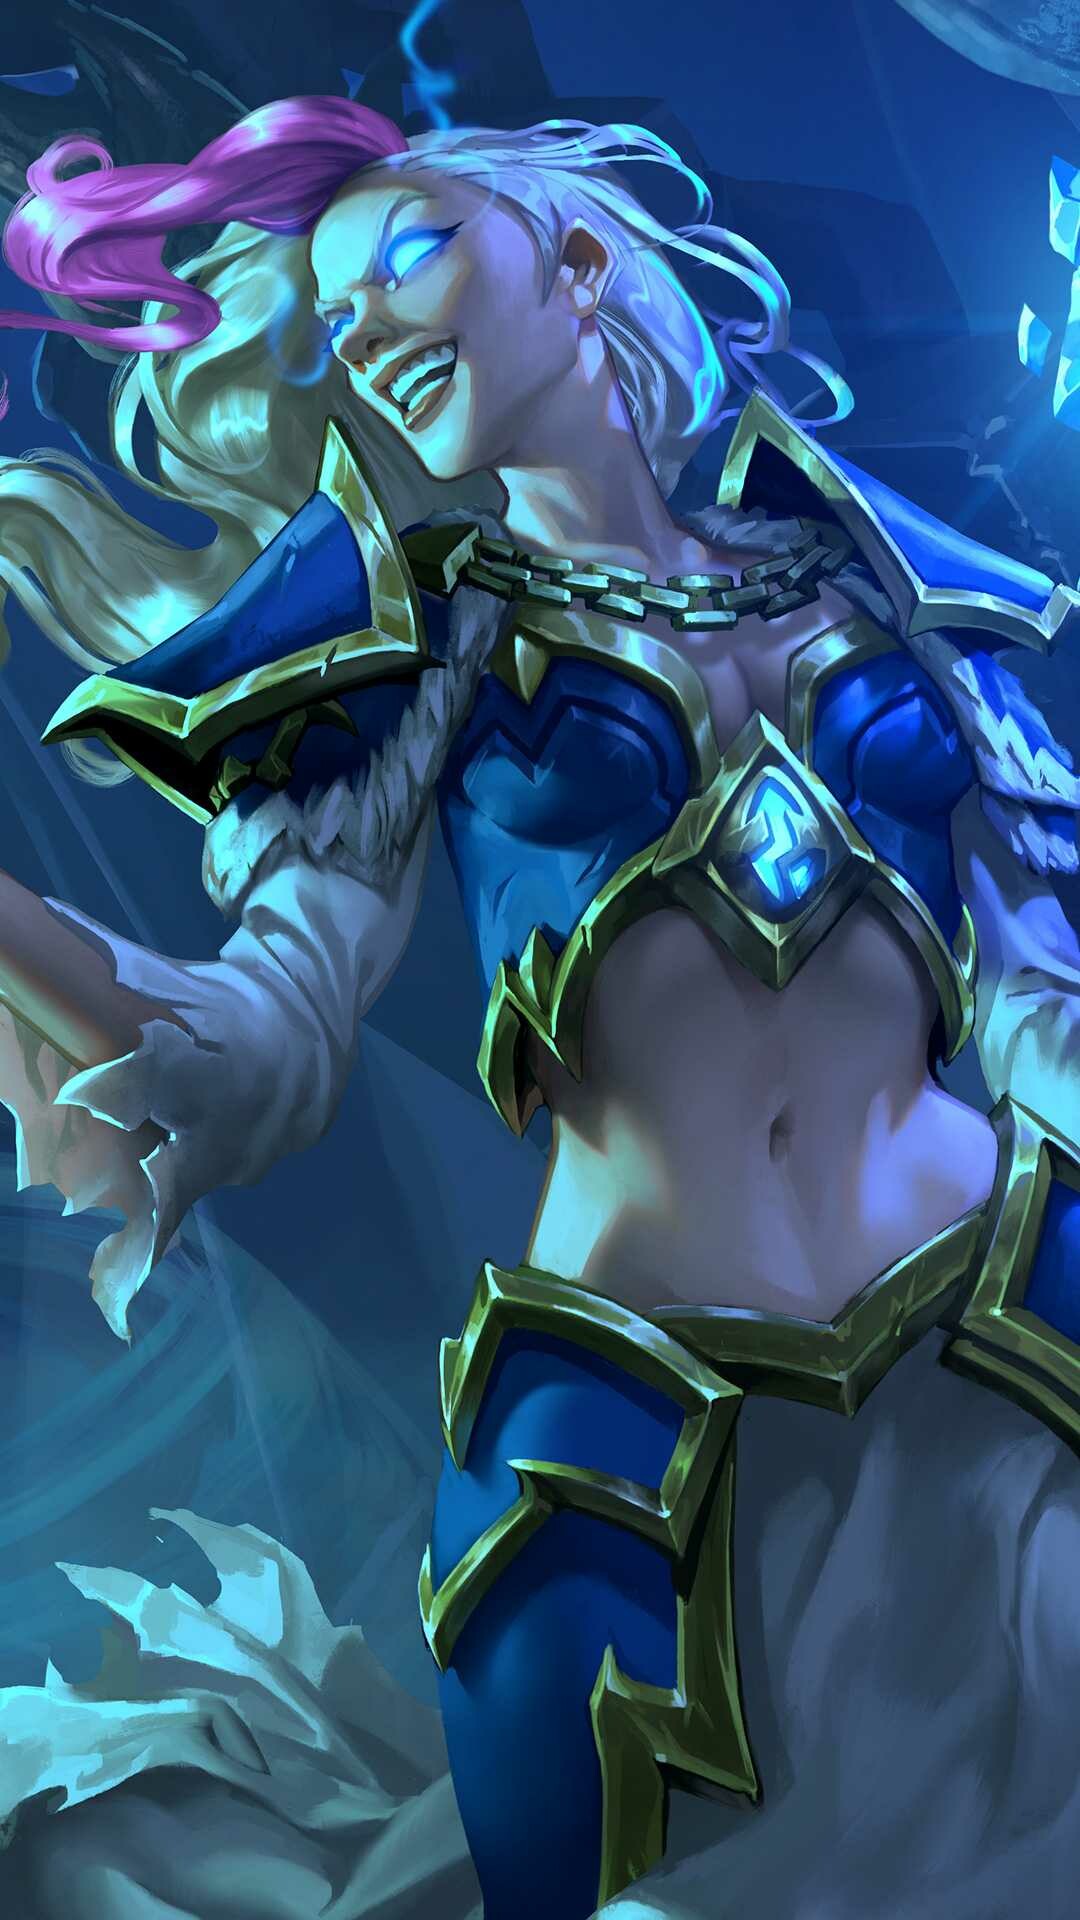 Vibrant Hearthstone, Awesome free wallpapers, High definition, Gaming visuals, 1080x1920 Full HD Phone